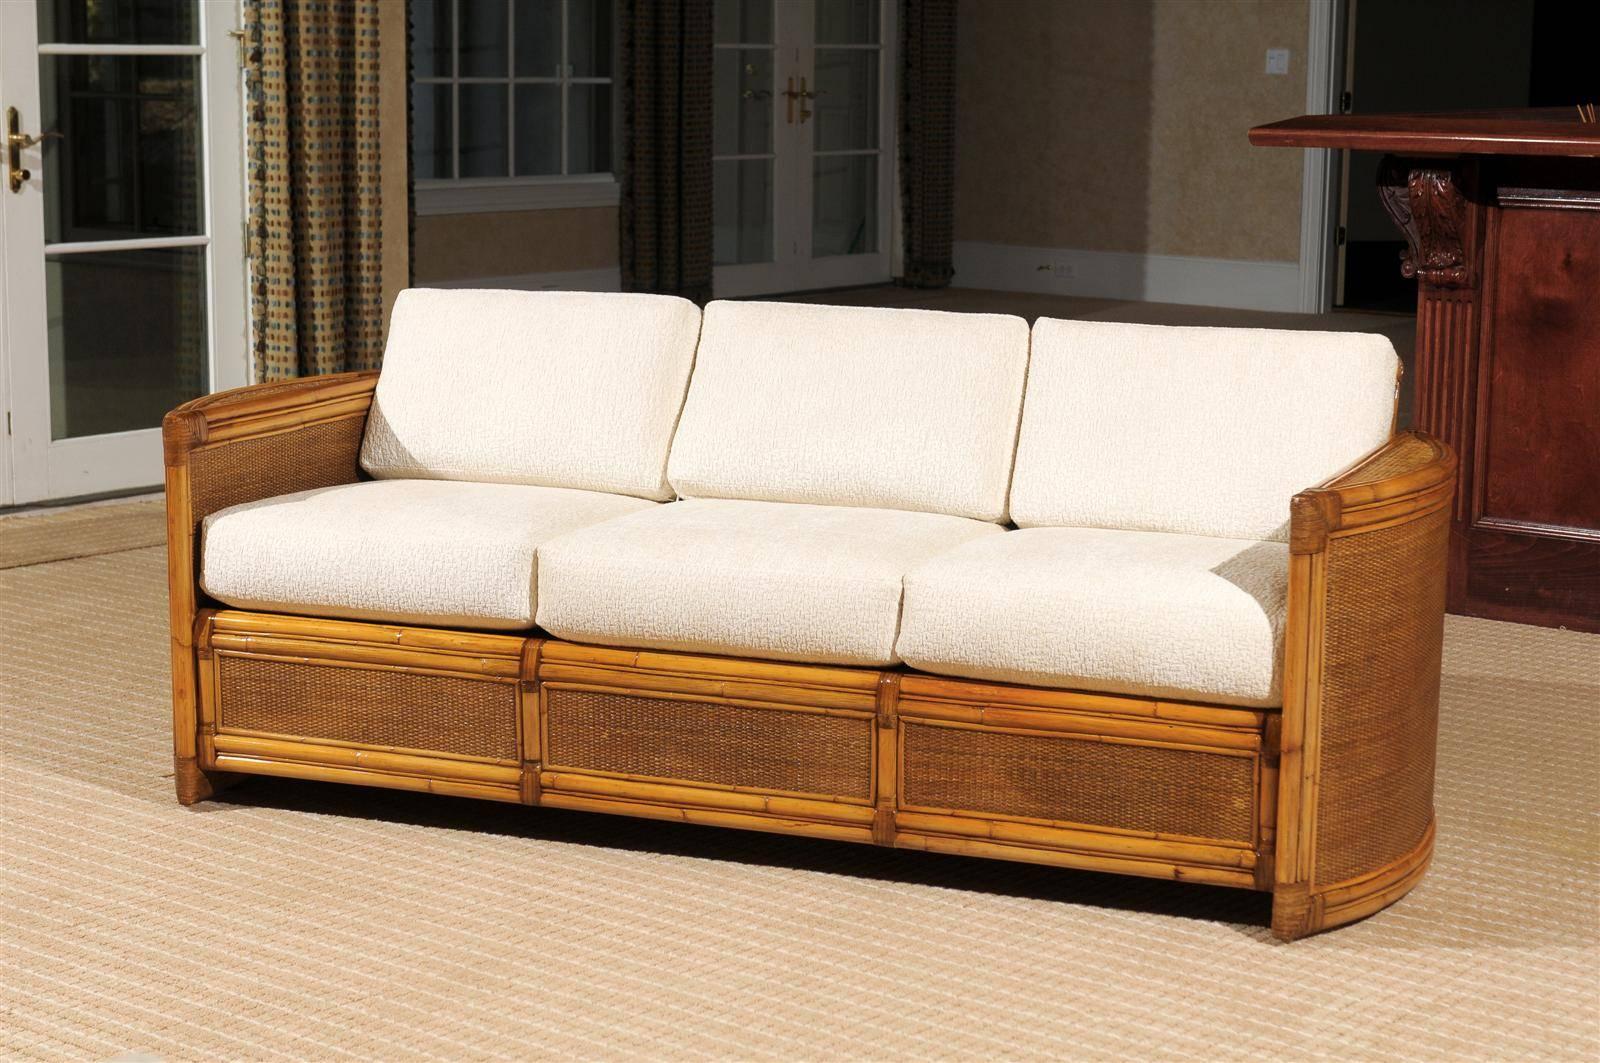 A beautiful large-scale vintage sofa, circa 1980. Stout rattan and hardwood construction with raffia panel accents and leather detail.  Excellent support and comfort. Exceptional design and craftsmanship. A wonderful way to bring warmth and texture